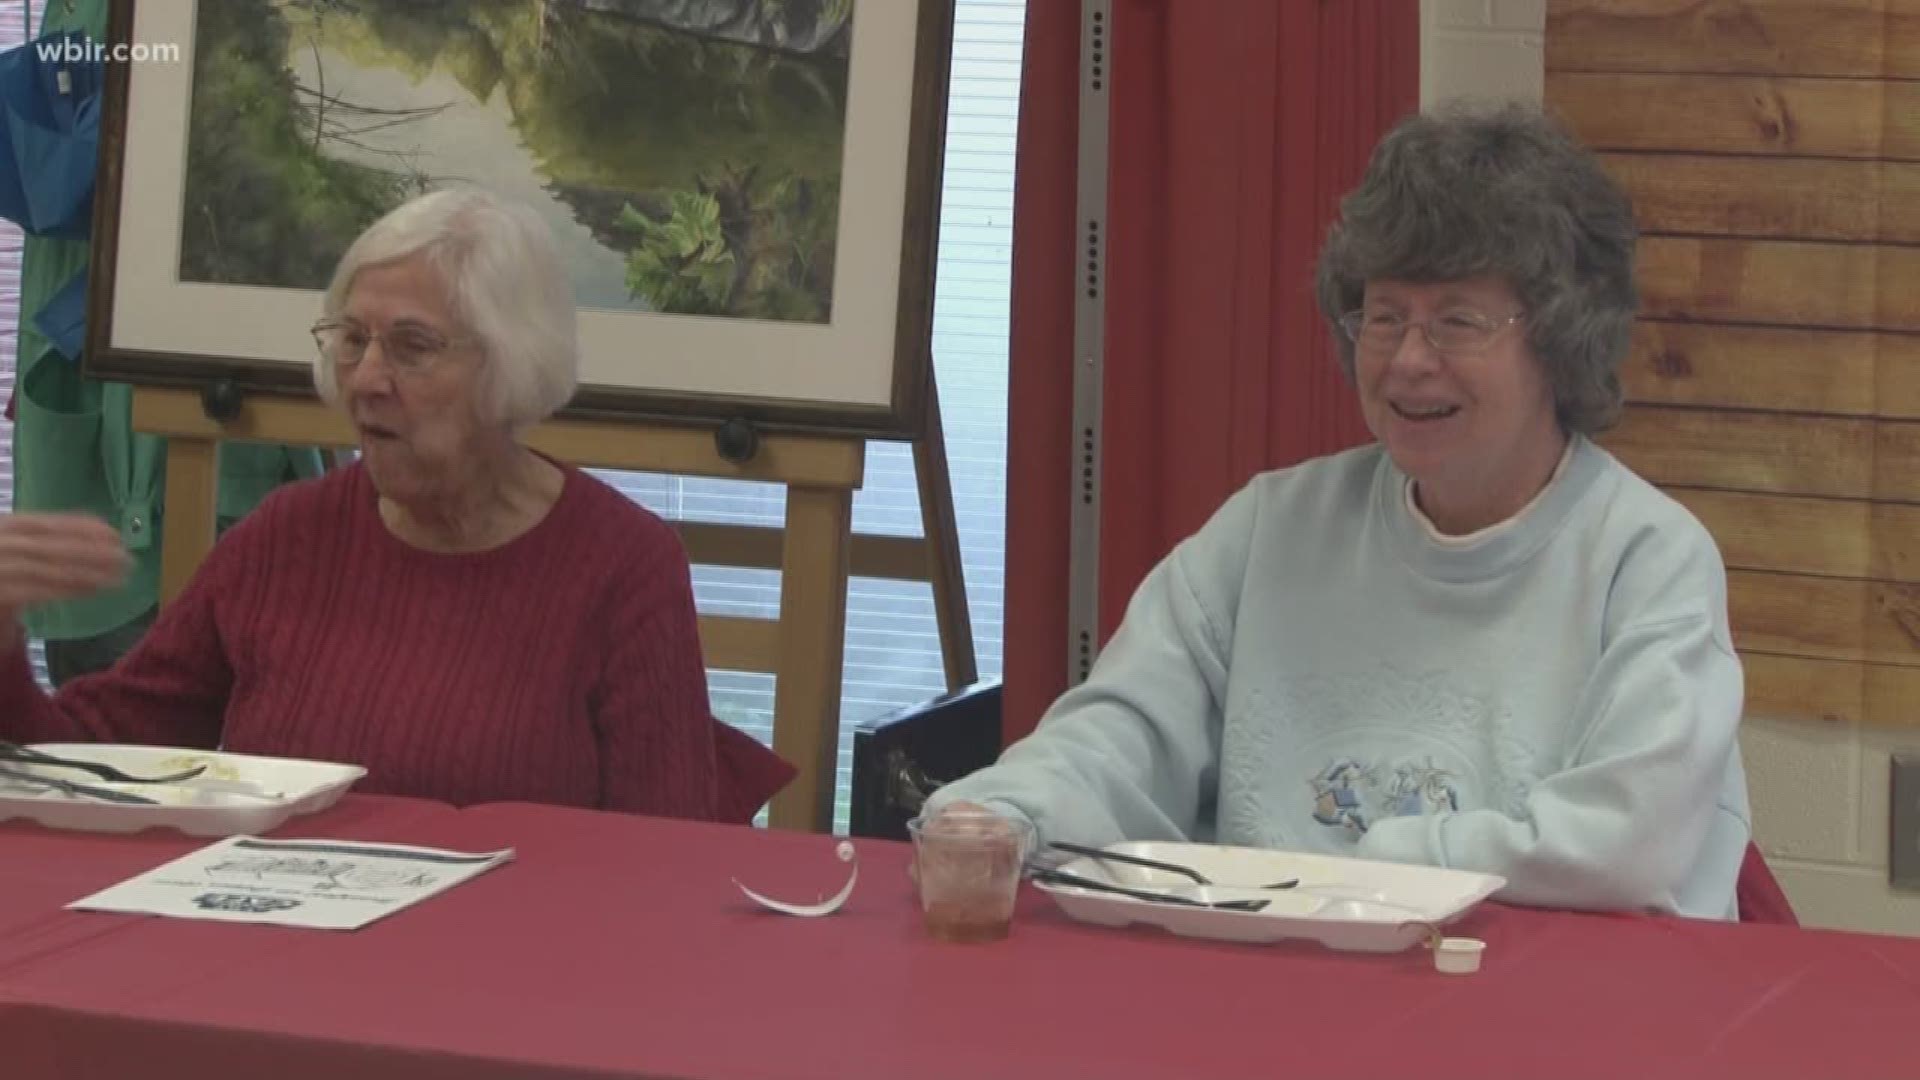 A walking club from the O'Connor Senior Center in North Knoxville celebrated a milestone today.